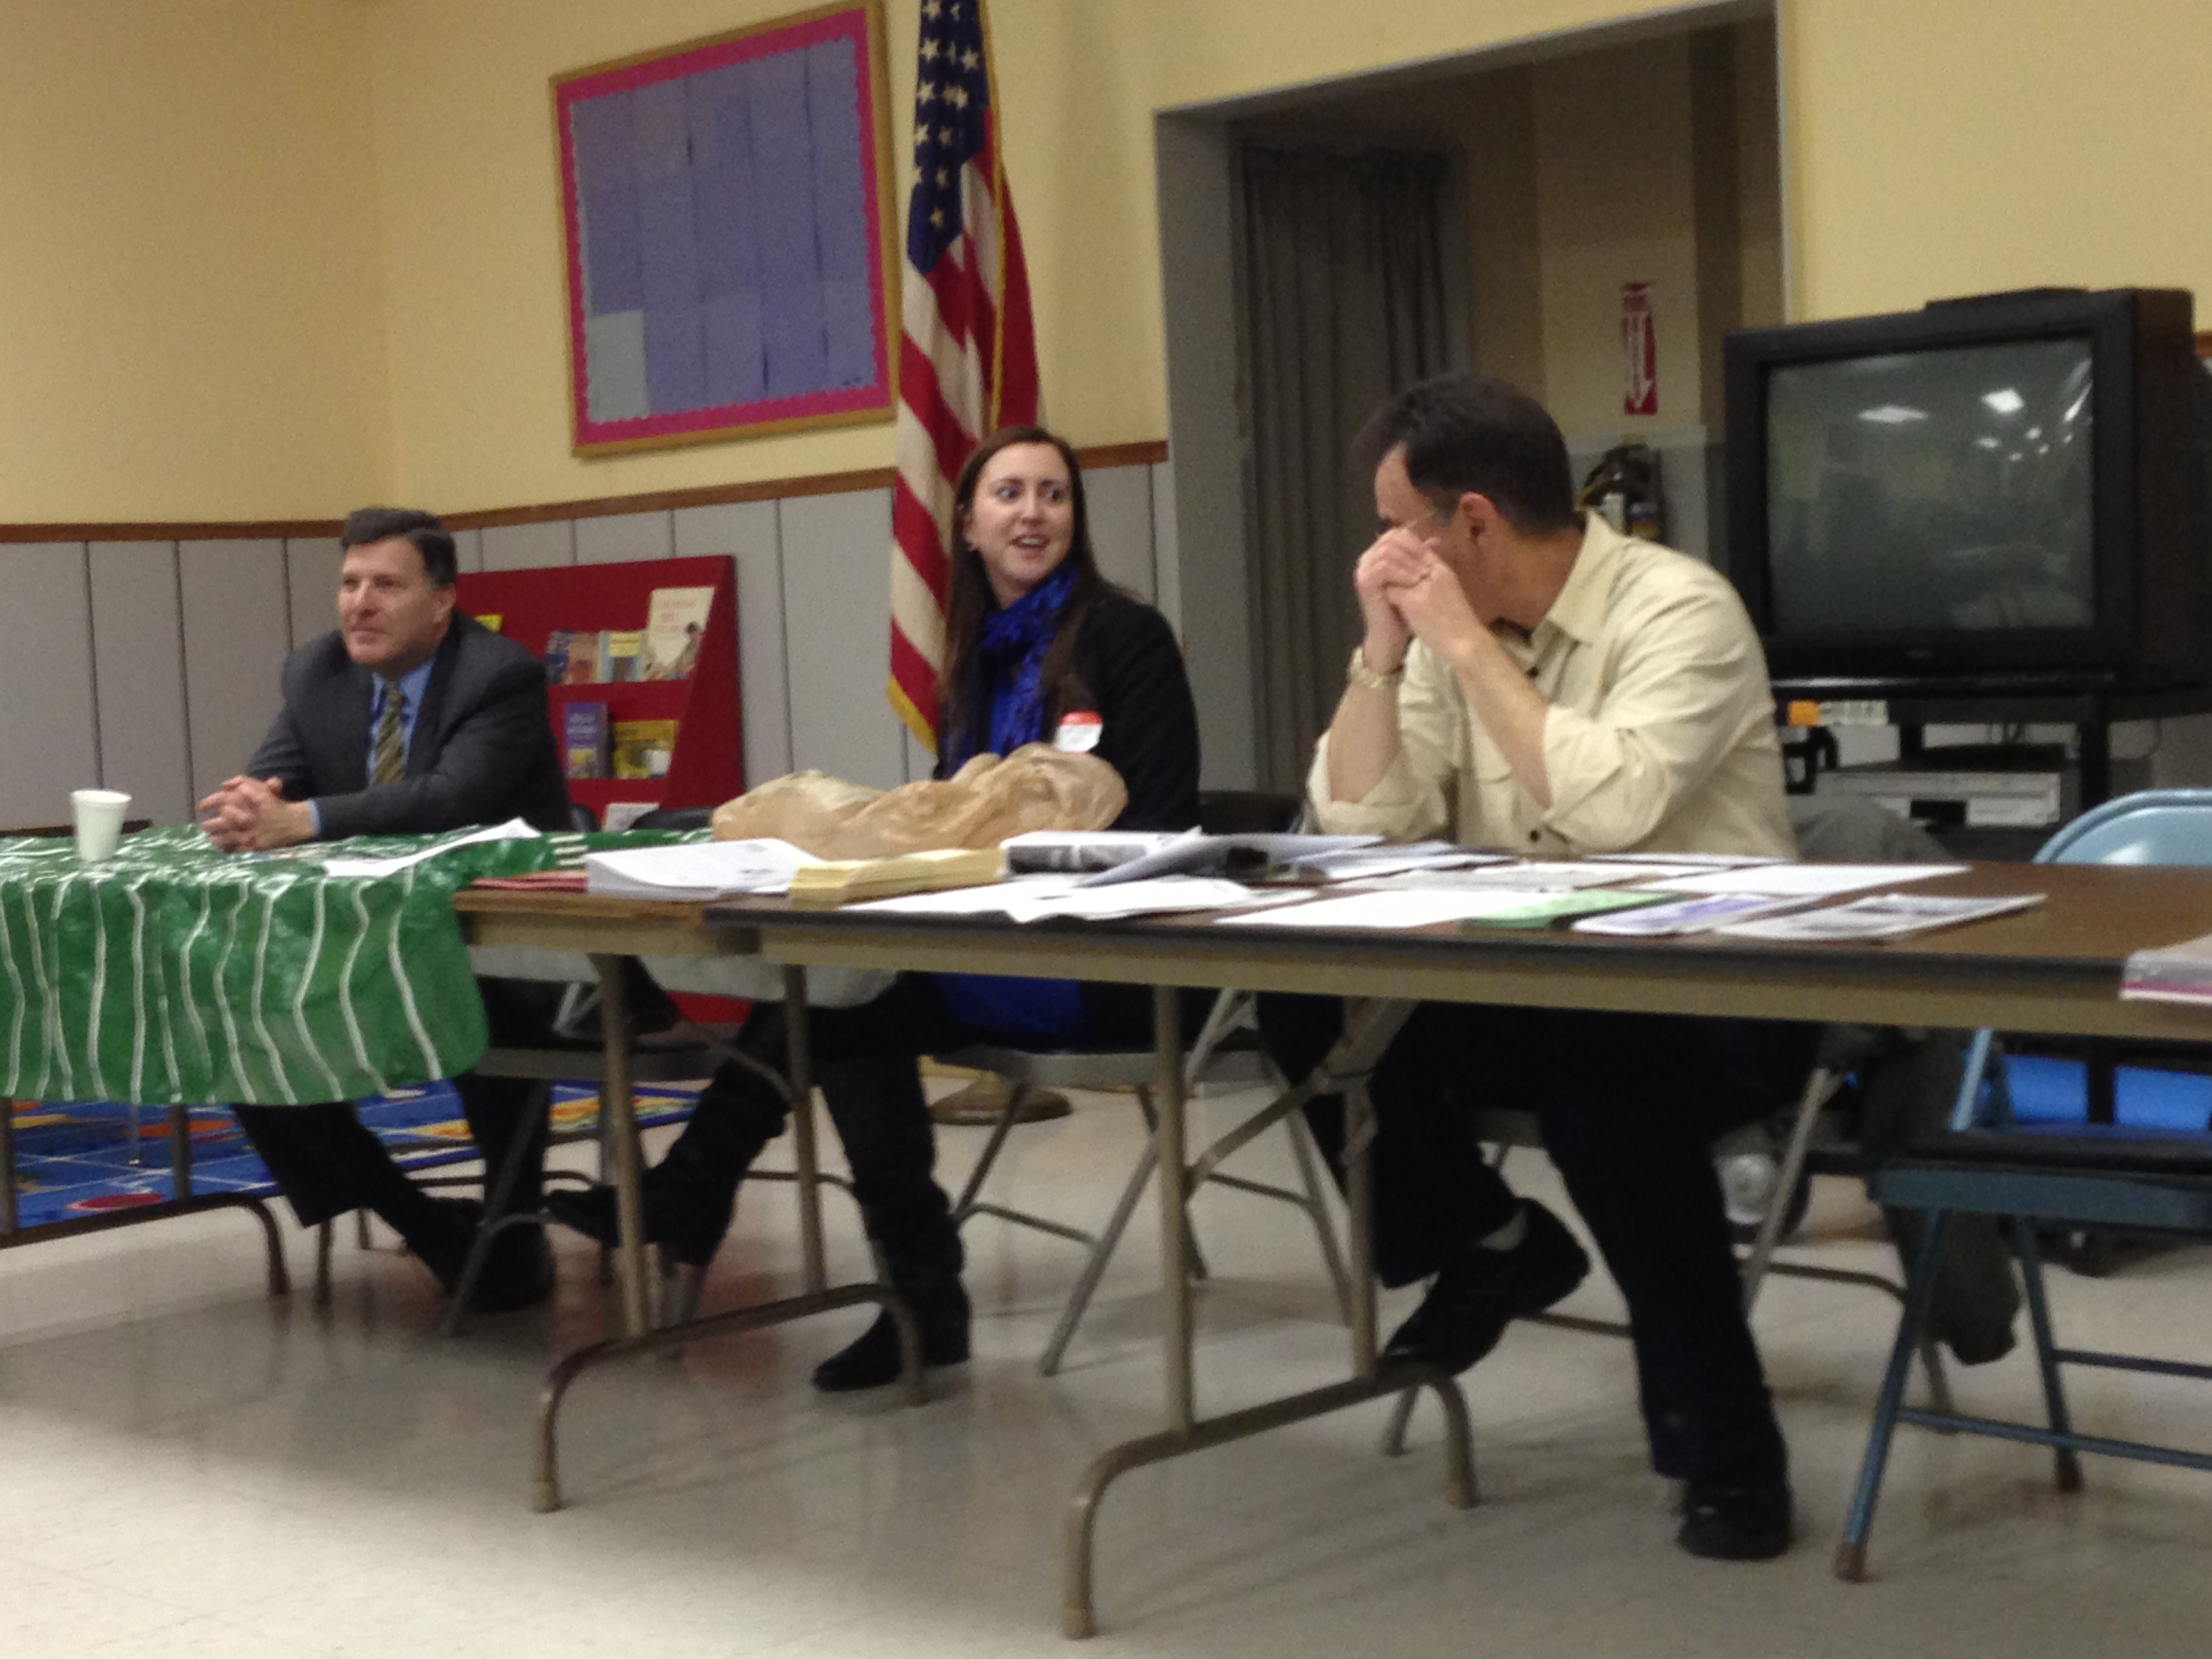 Assemblywoman Nily Rozic spoke to the Bayside Hills Civic Association about quality of life issues.